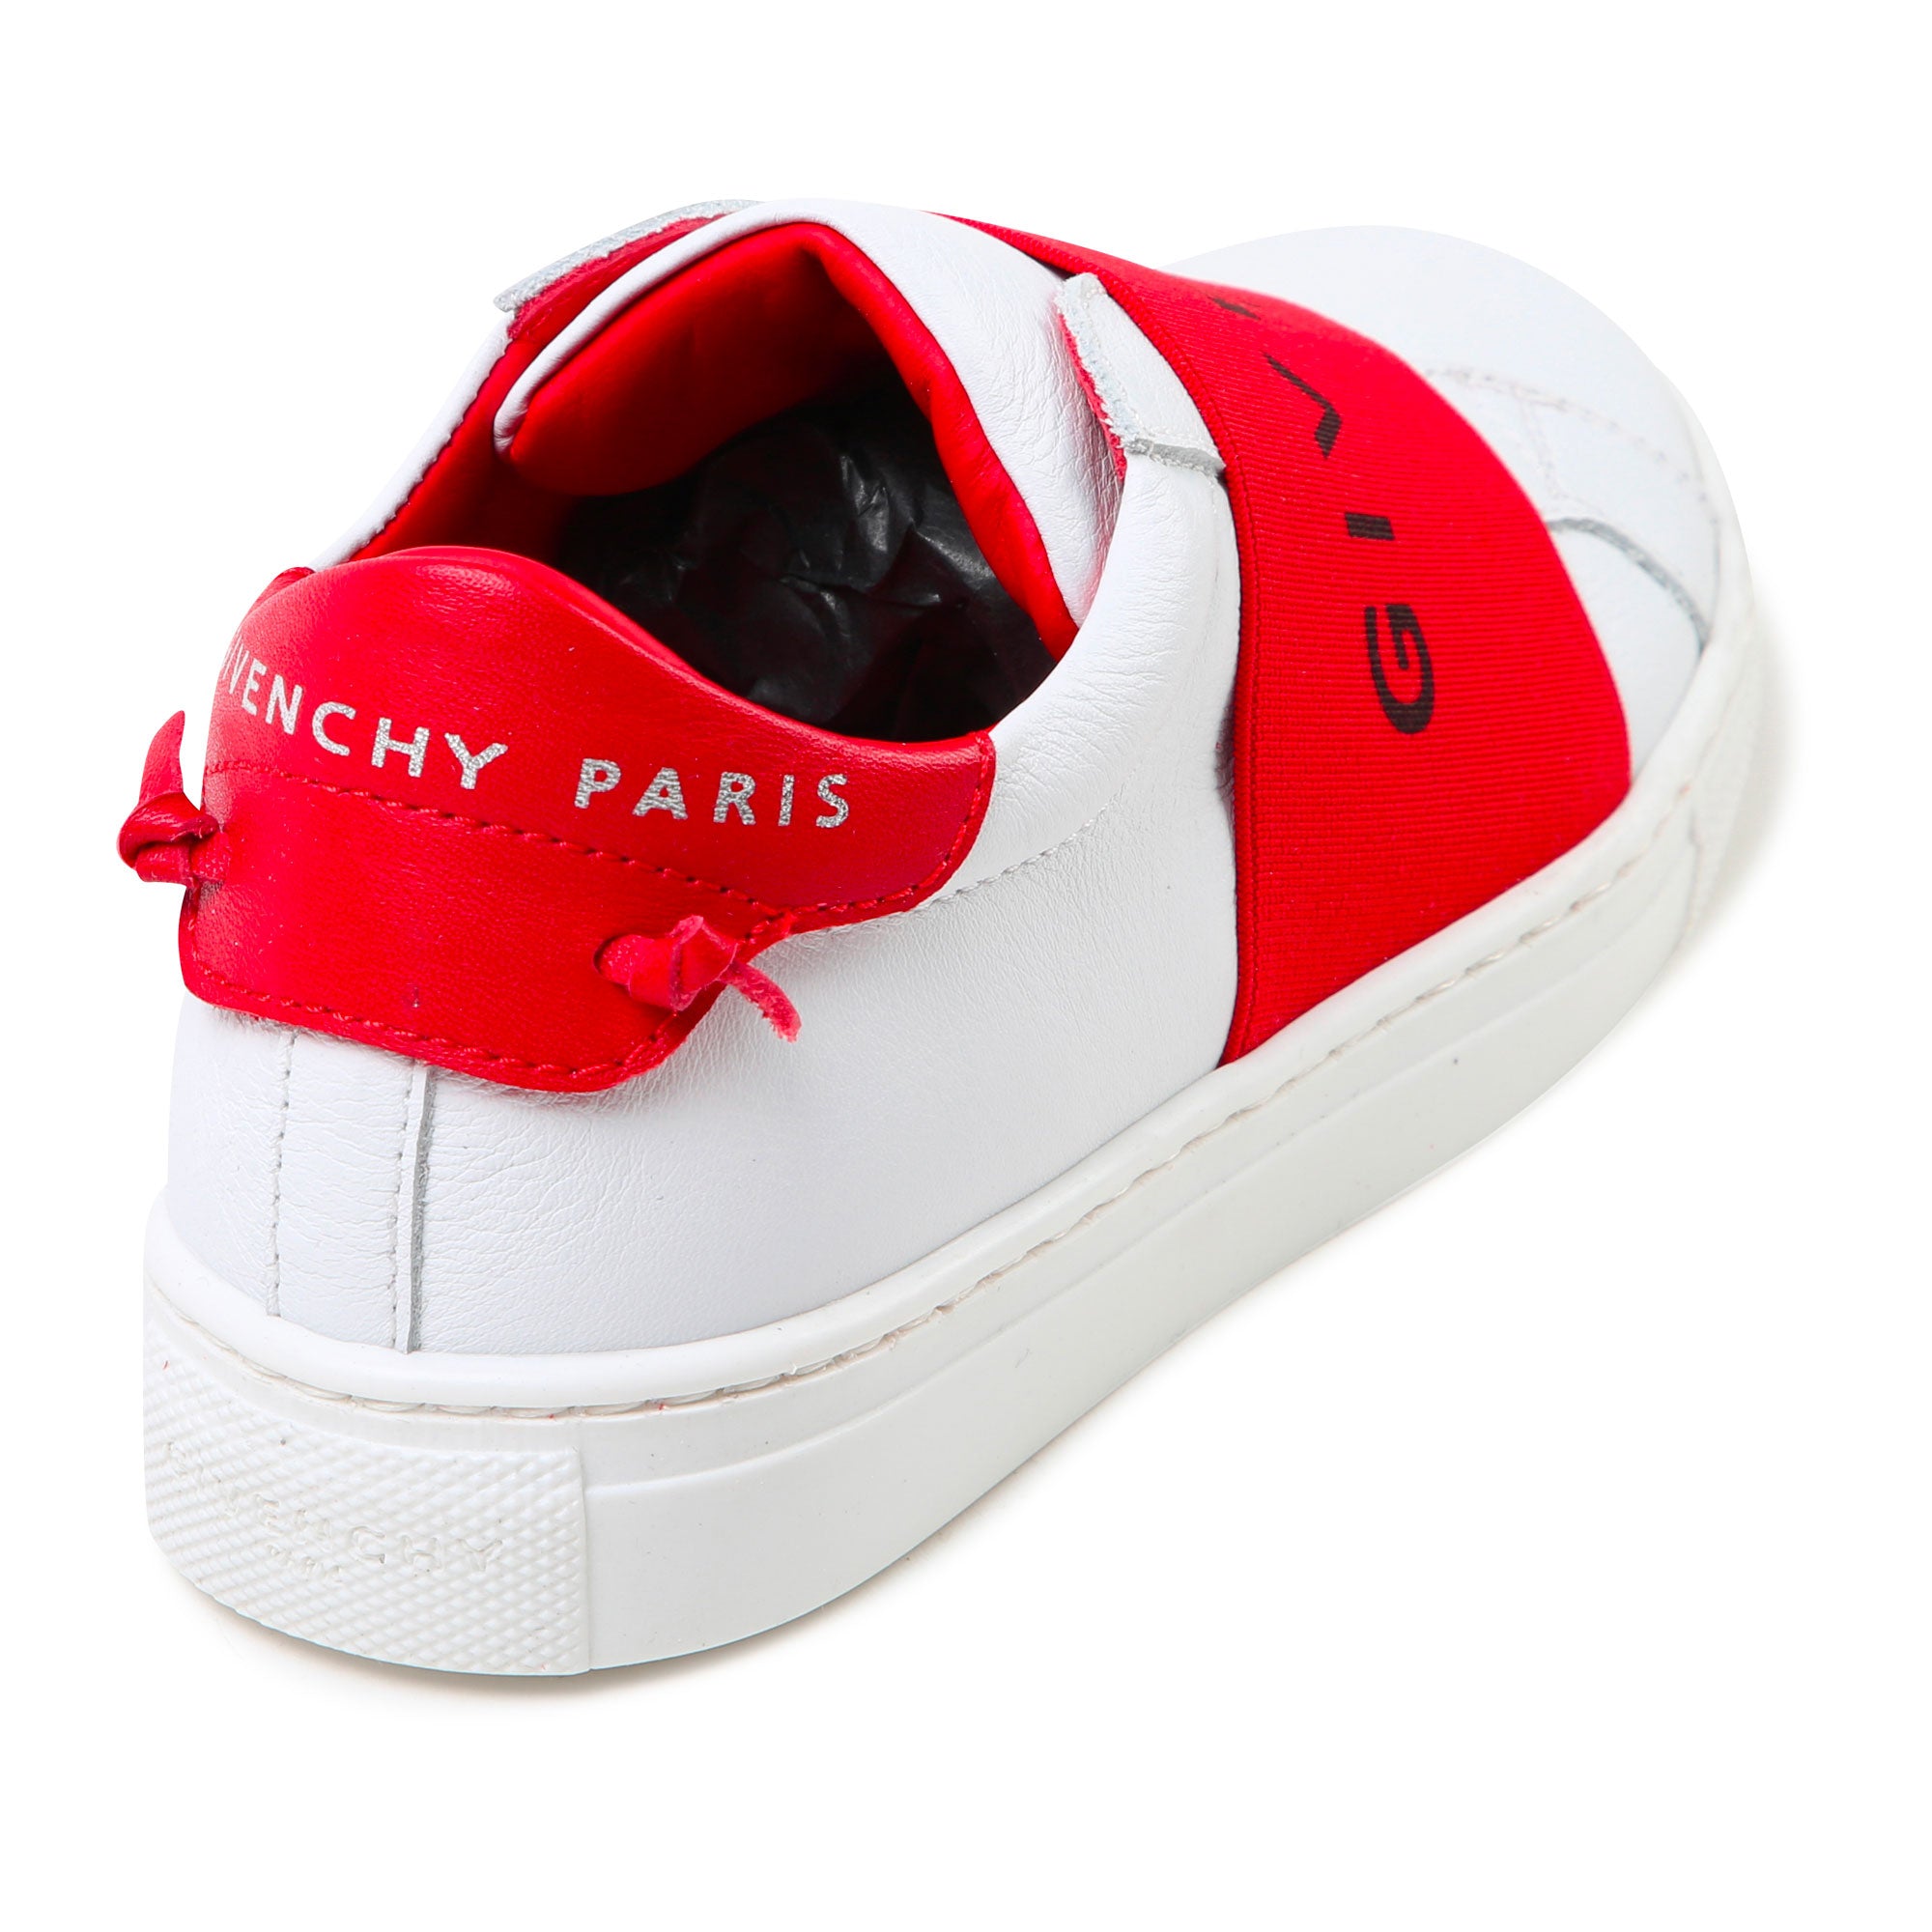 Girls White & Red Logo Shoes